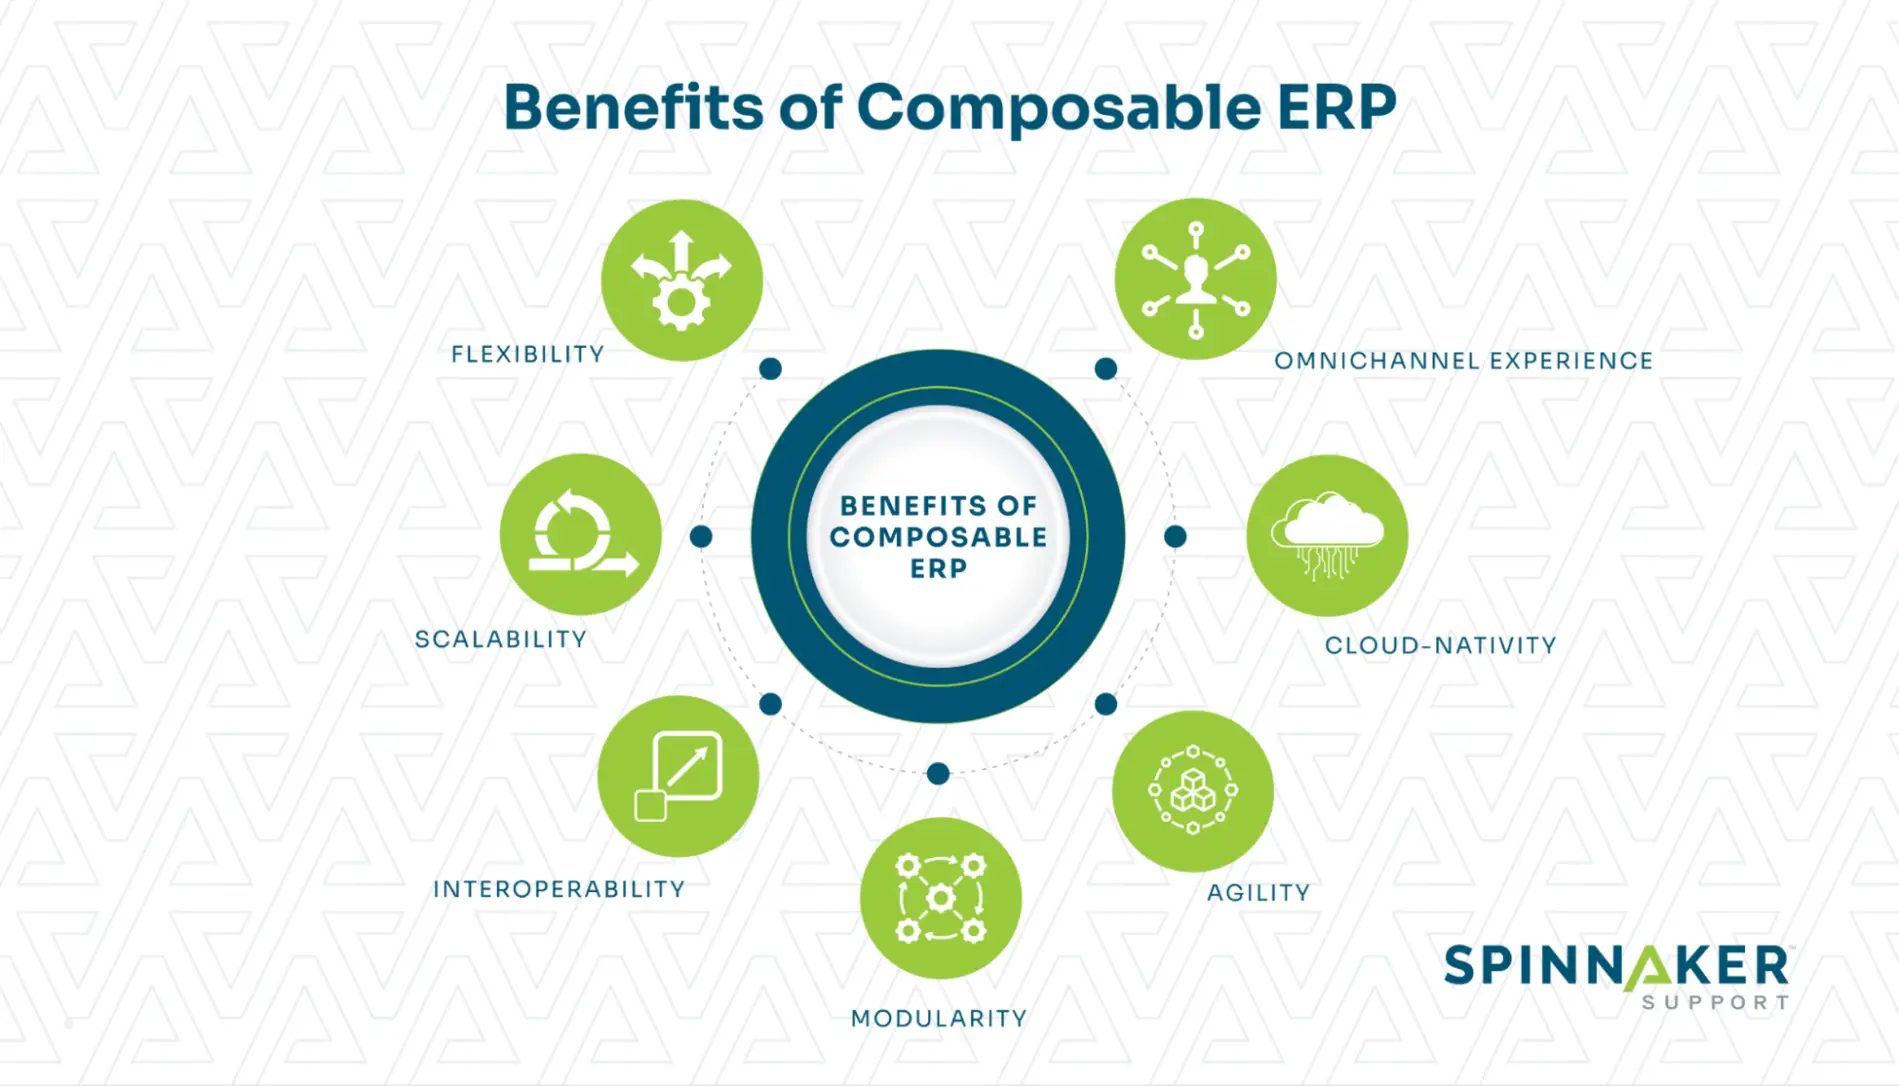 How does composable ERP add value to businesses